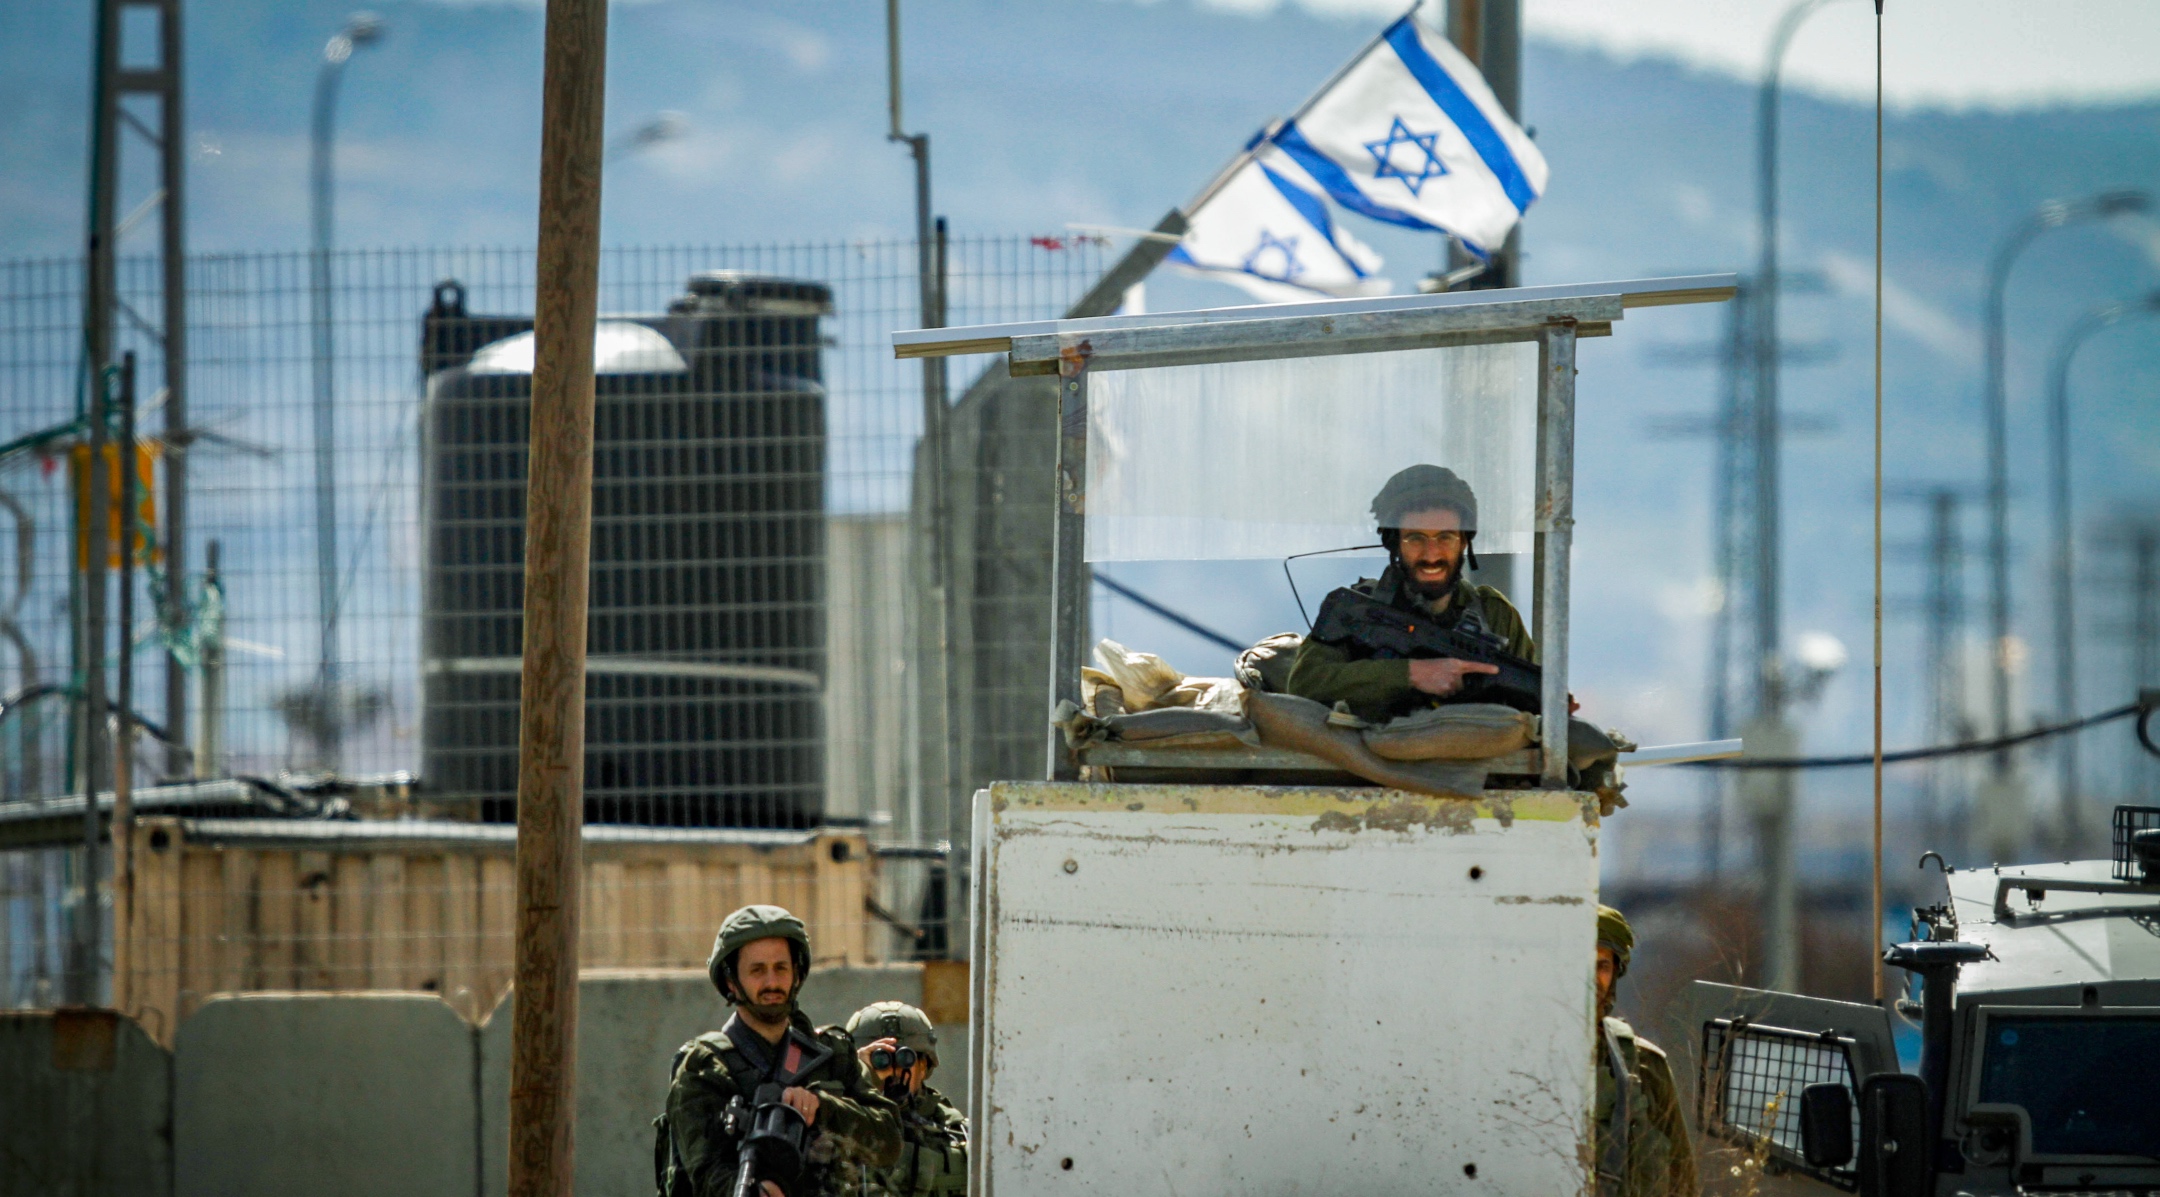 Israeli soldiers guard as Palestinians protest at the Hawara checkpoint, south of the West Bank city of Nablus, Feb. 10, 2022. (Nasser Ishtayeh/Flash90)